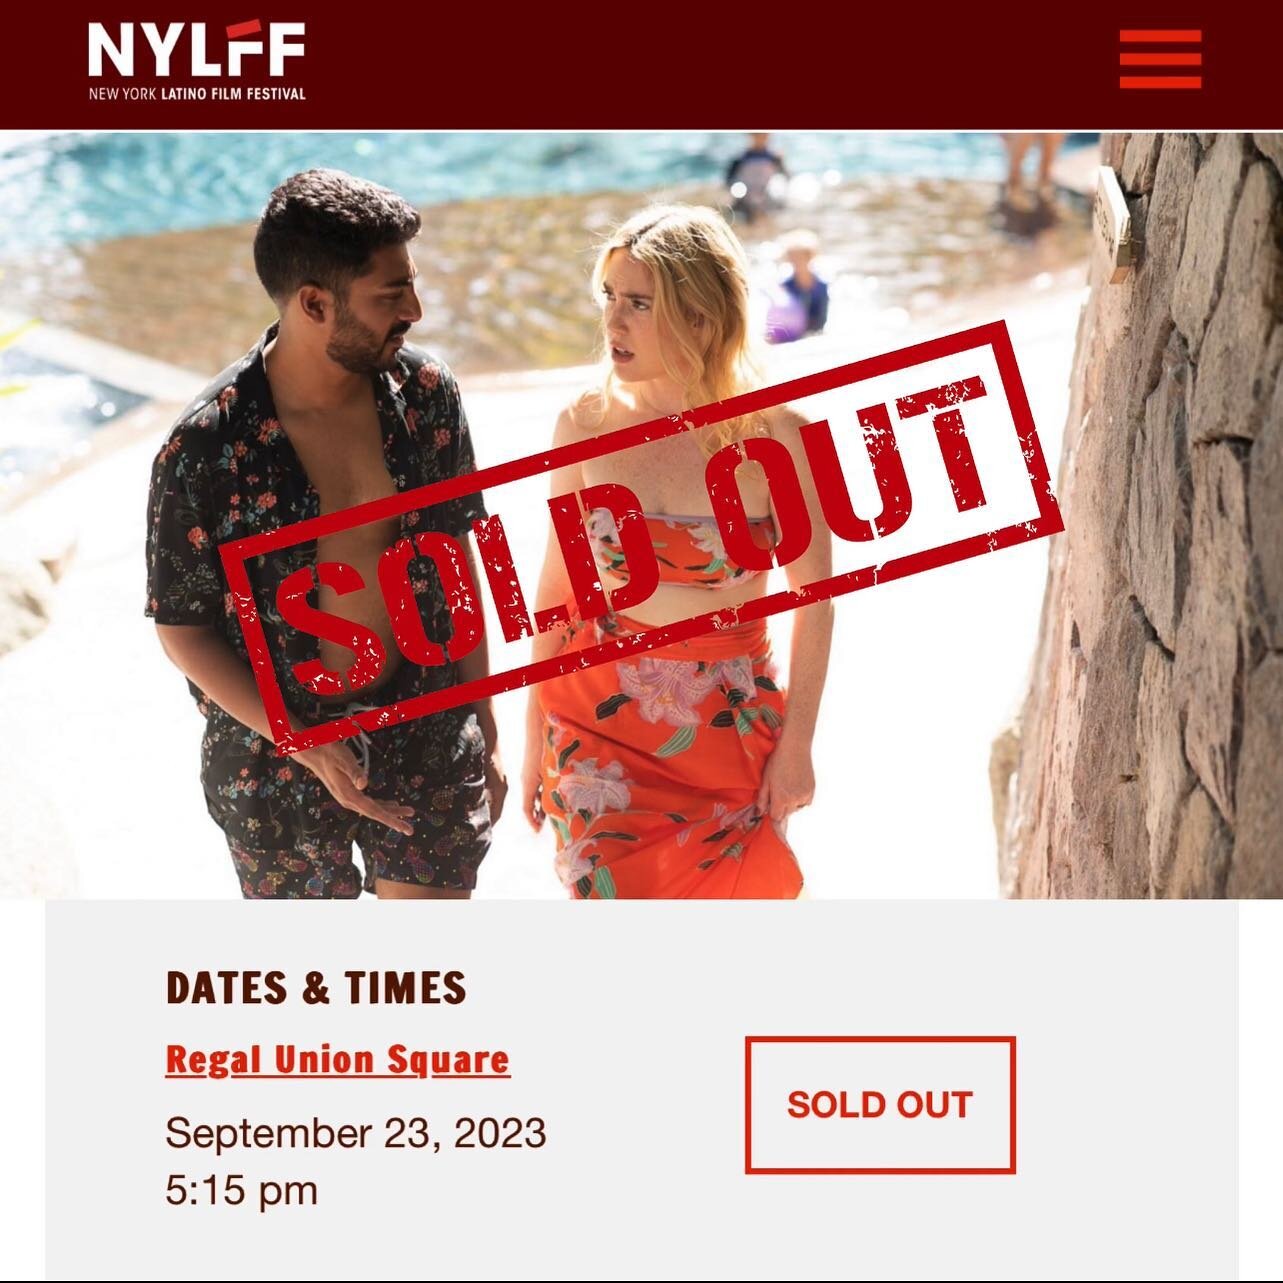 So excited for our SOLD OUT East Coast Premiere @nylatinofilmfestival tomorrow!

YOU, ME &amp; HER
@2handsproductions @irreversible_pictures

@selinaringel @teshrajan @heysydneypark @mariannaburelli @robaguire @sibleyface @annawillgram 

Writer @seli